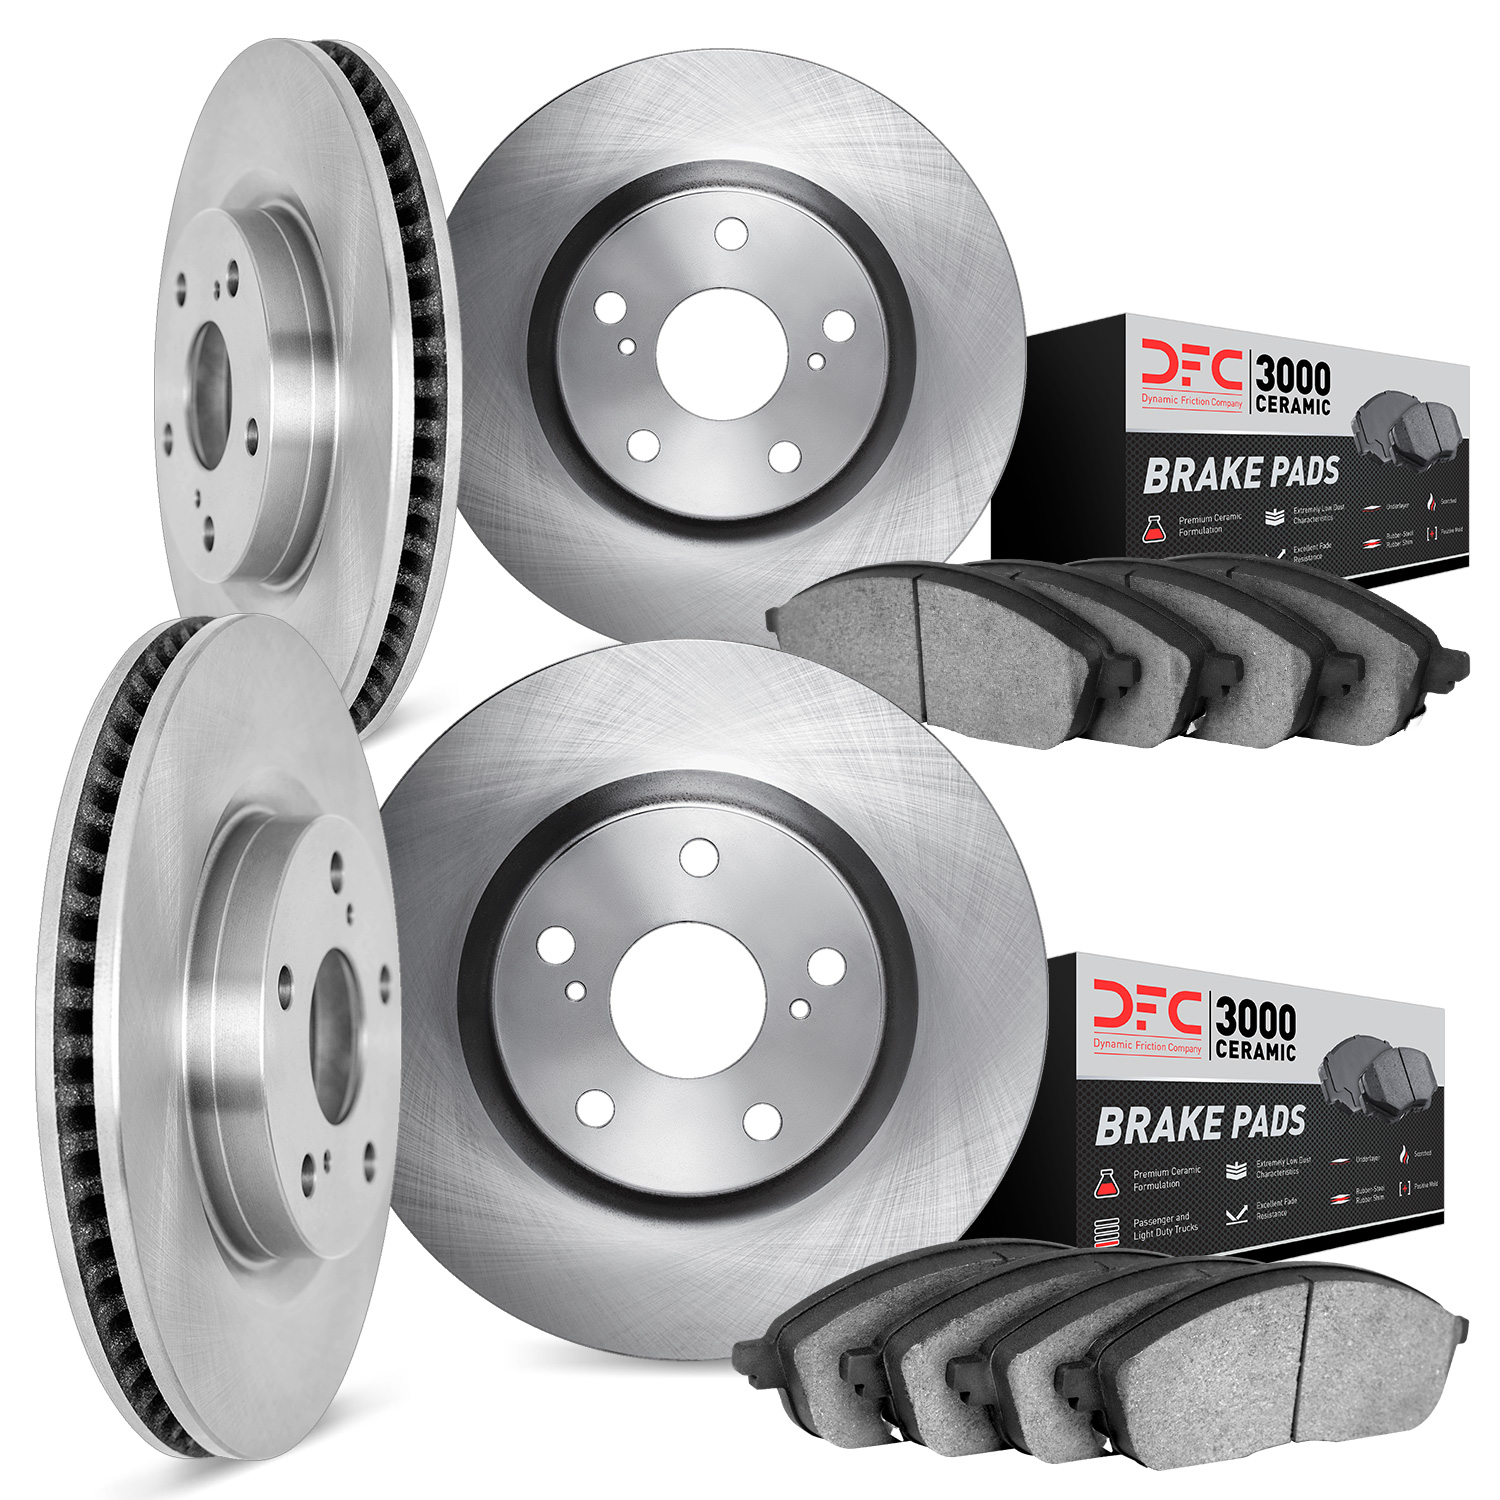 6304-75023 Brake Rotors with 3000-Series Ceramic Brake Pads Kit, 2007-2017 Lexus/Toyota/Scion, Position: Front and Rear